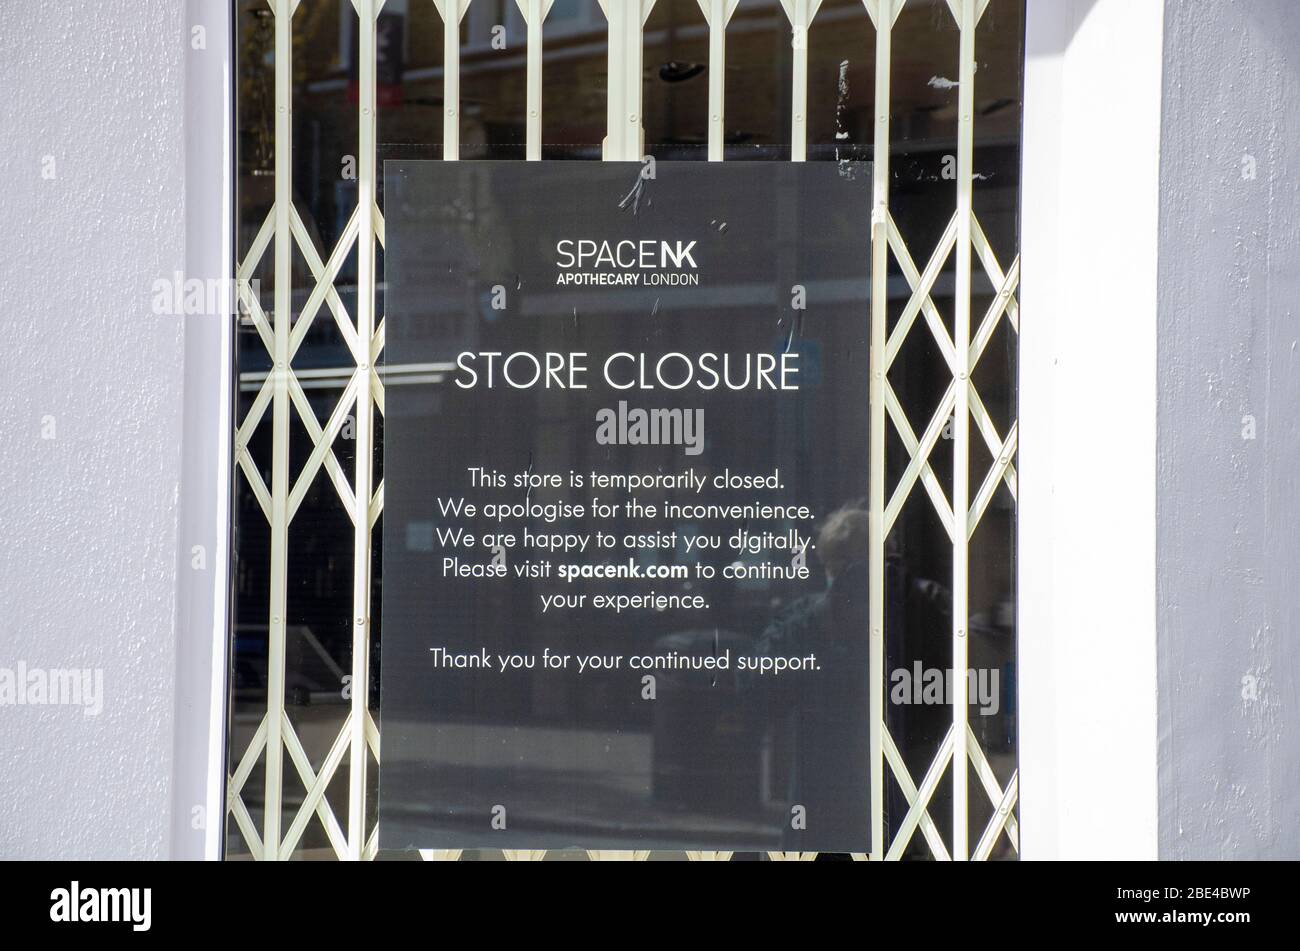 London, UK, 6 April 2020 Space NK Northcote Road. 46 Northcote Road, London, SW11 1NZ Signs in shop windows showing closed due to coronavirus. Stock Photo